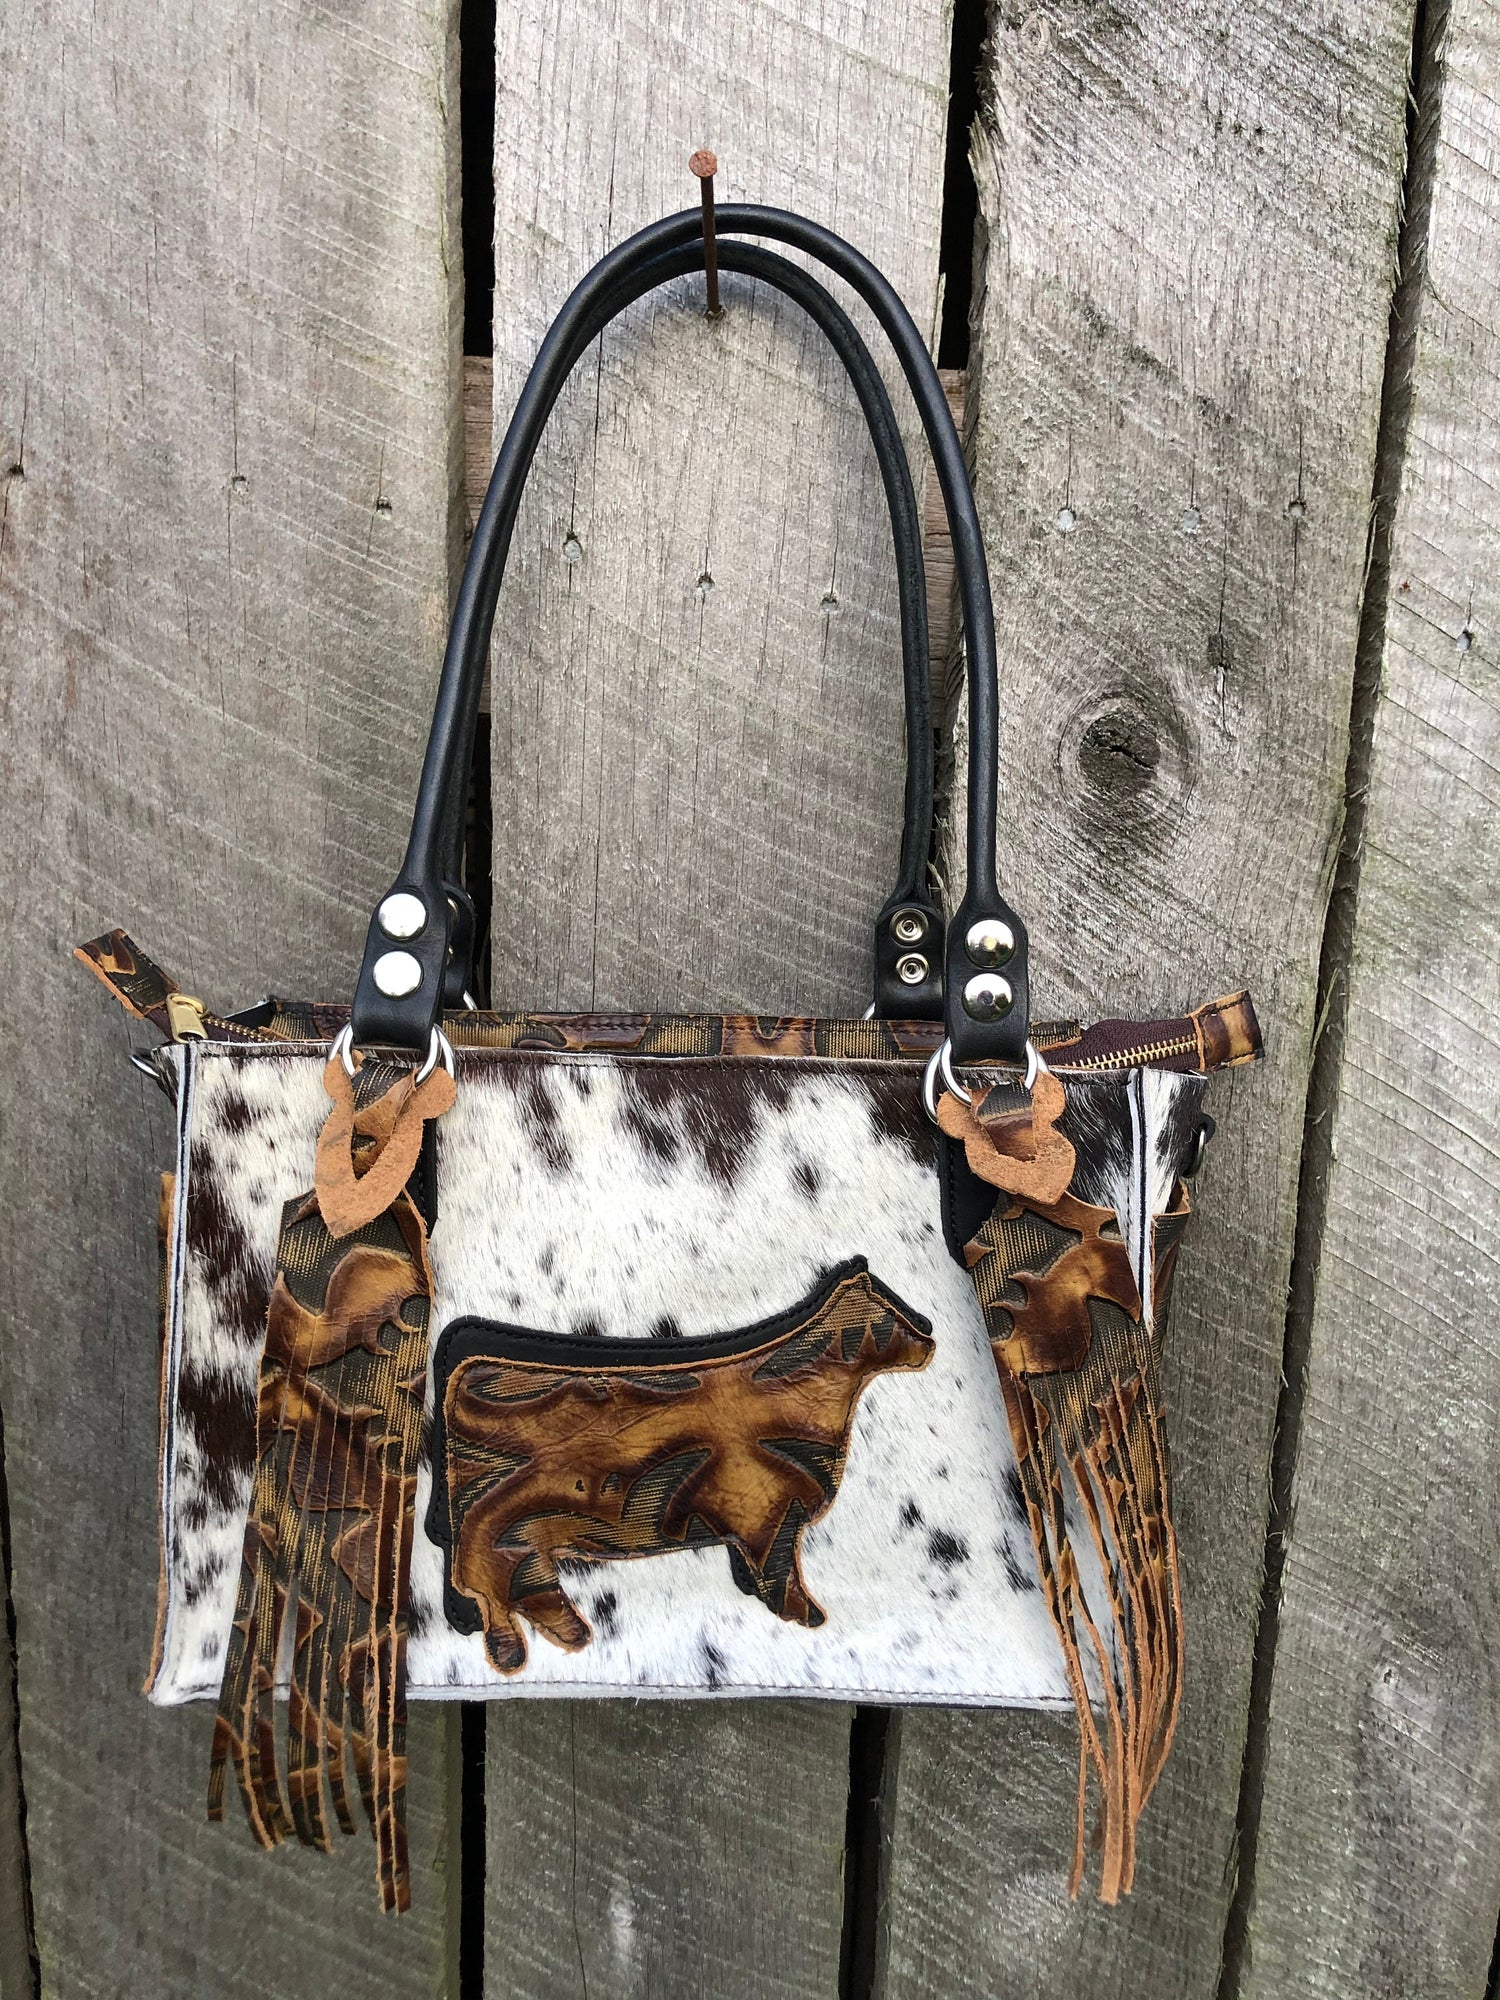 Buy COWHIDE HAIR on HANDBAGS Unique Bags and Purses Shoulder Bag in Brown  White Hide Hair Tote Leather Purse With Zipper on Top Birthday Gift Online  in India - Etsy